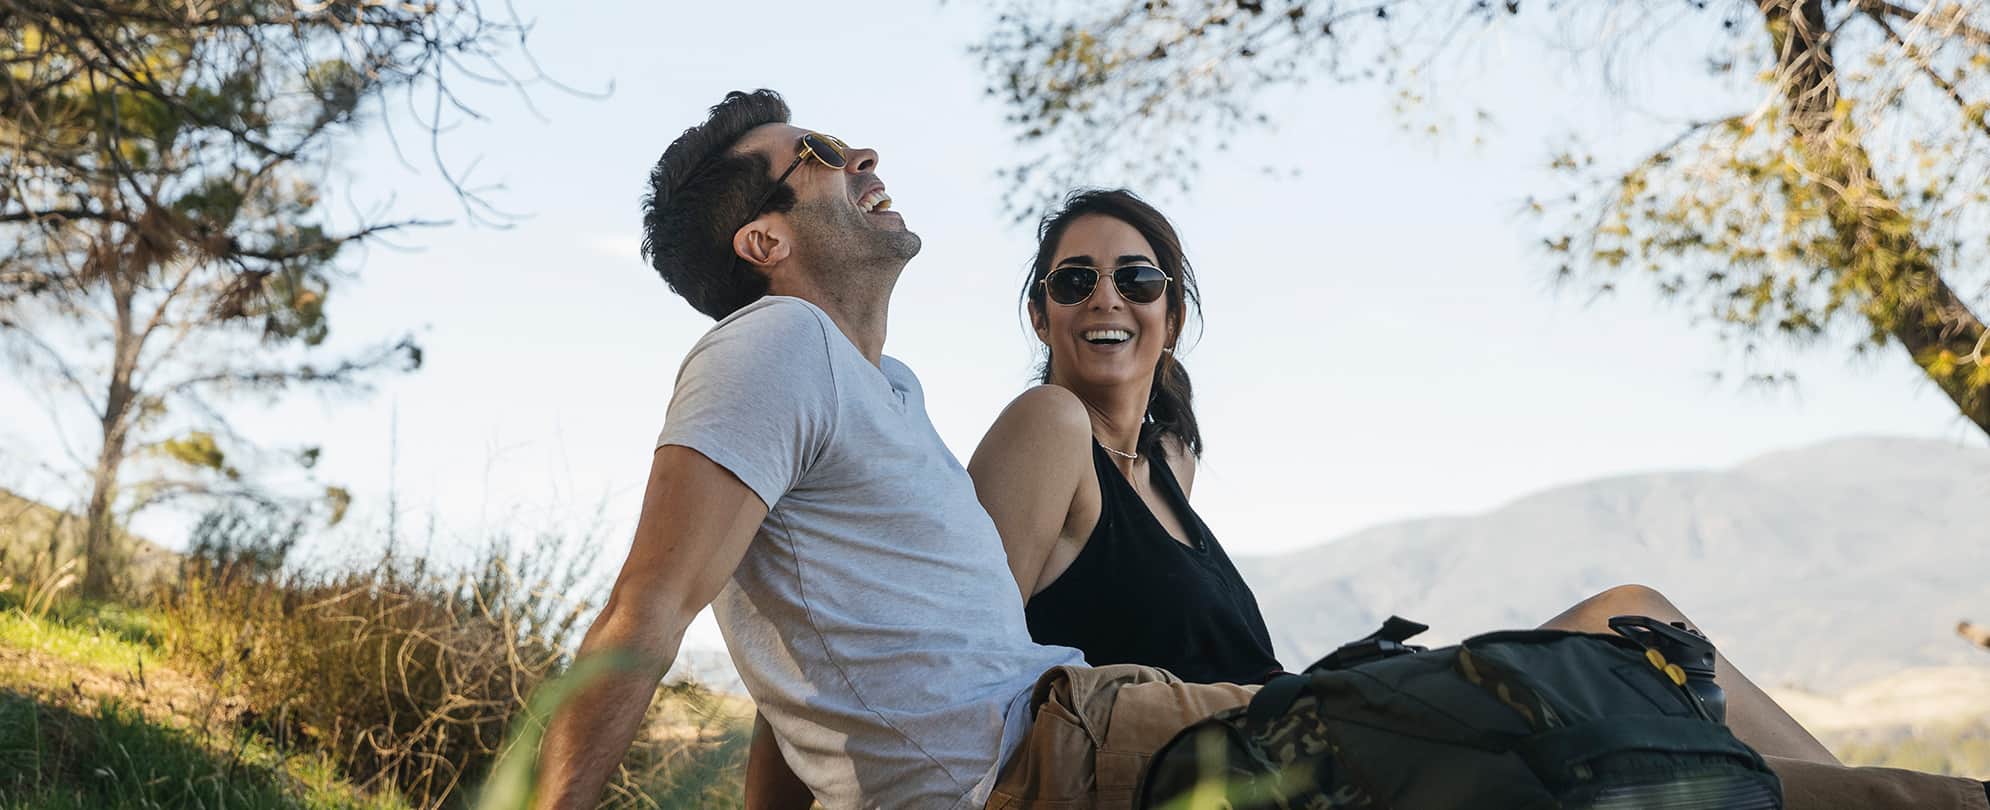 A man and woman sitting on a grassy hillside with mountains in the background, they are both smiling and wearing sunglasses.